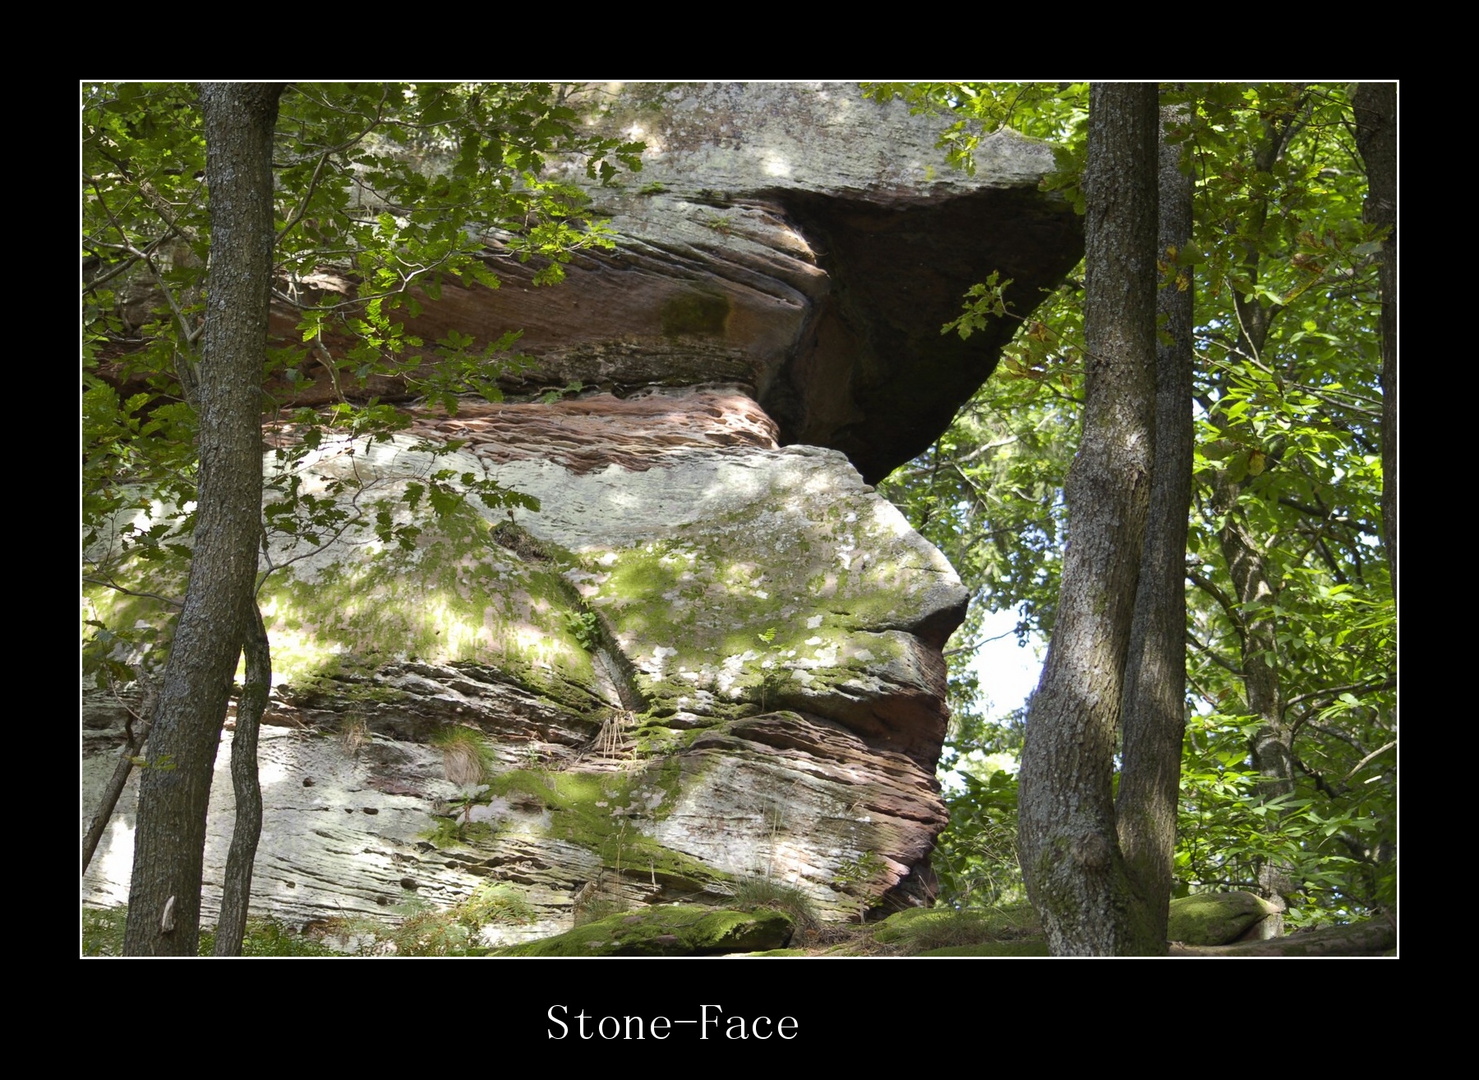 Stone-Face